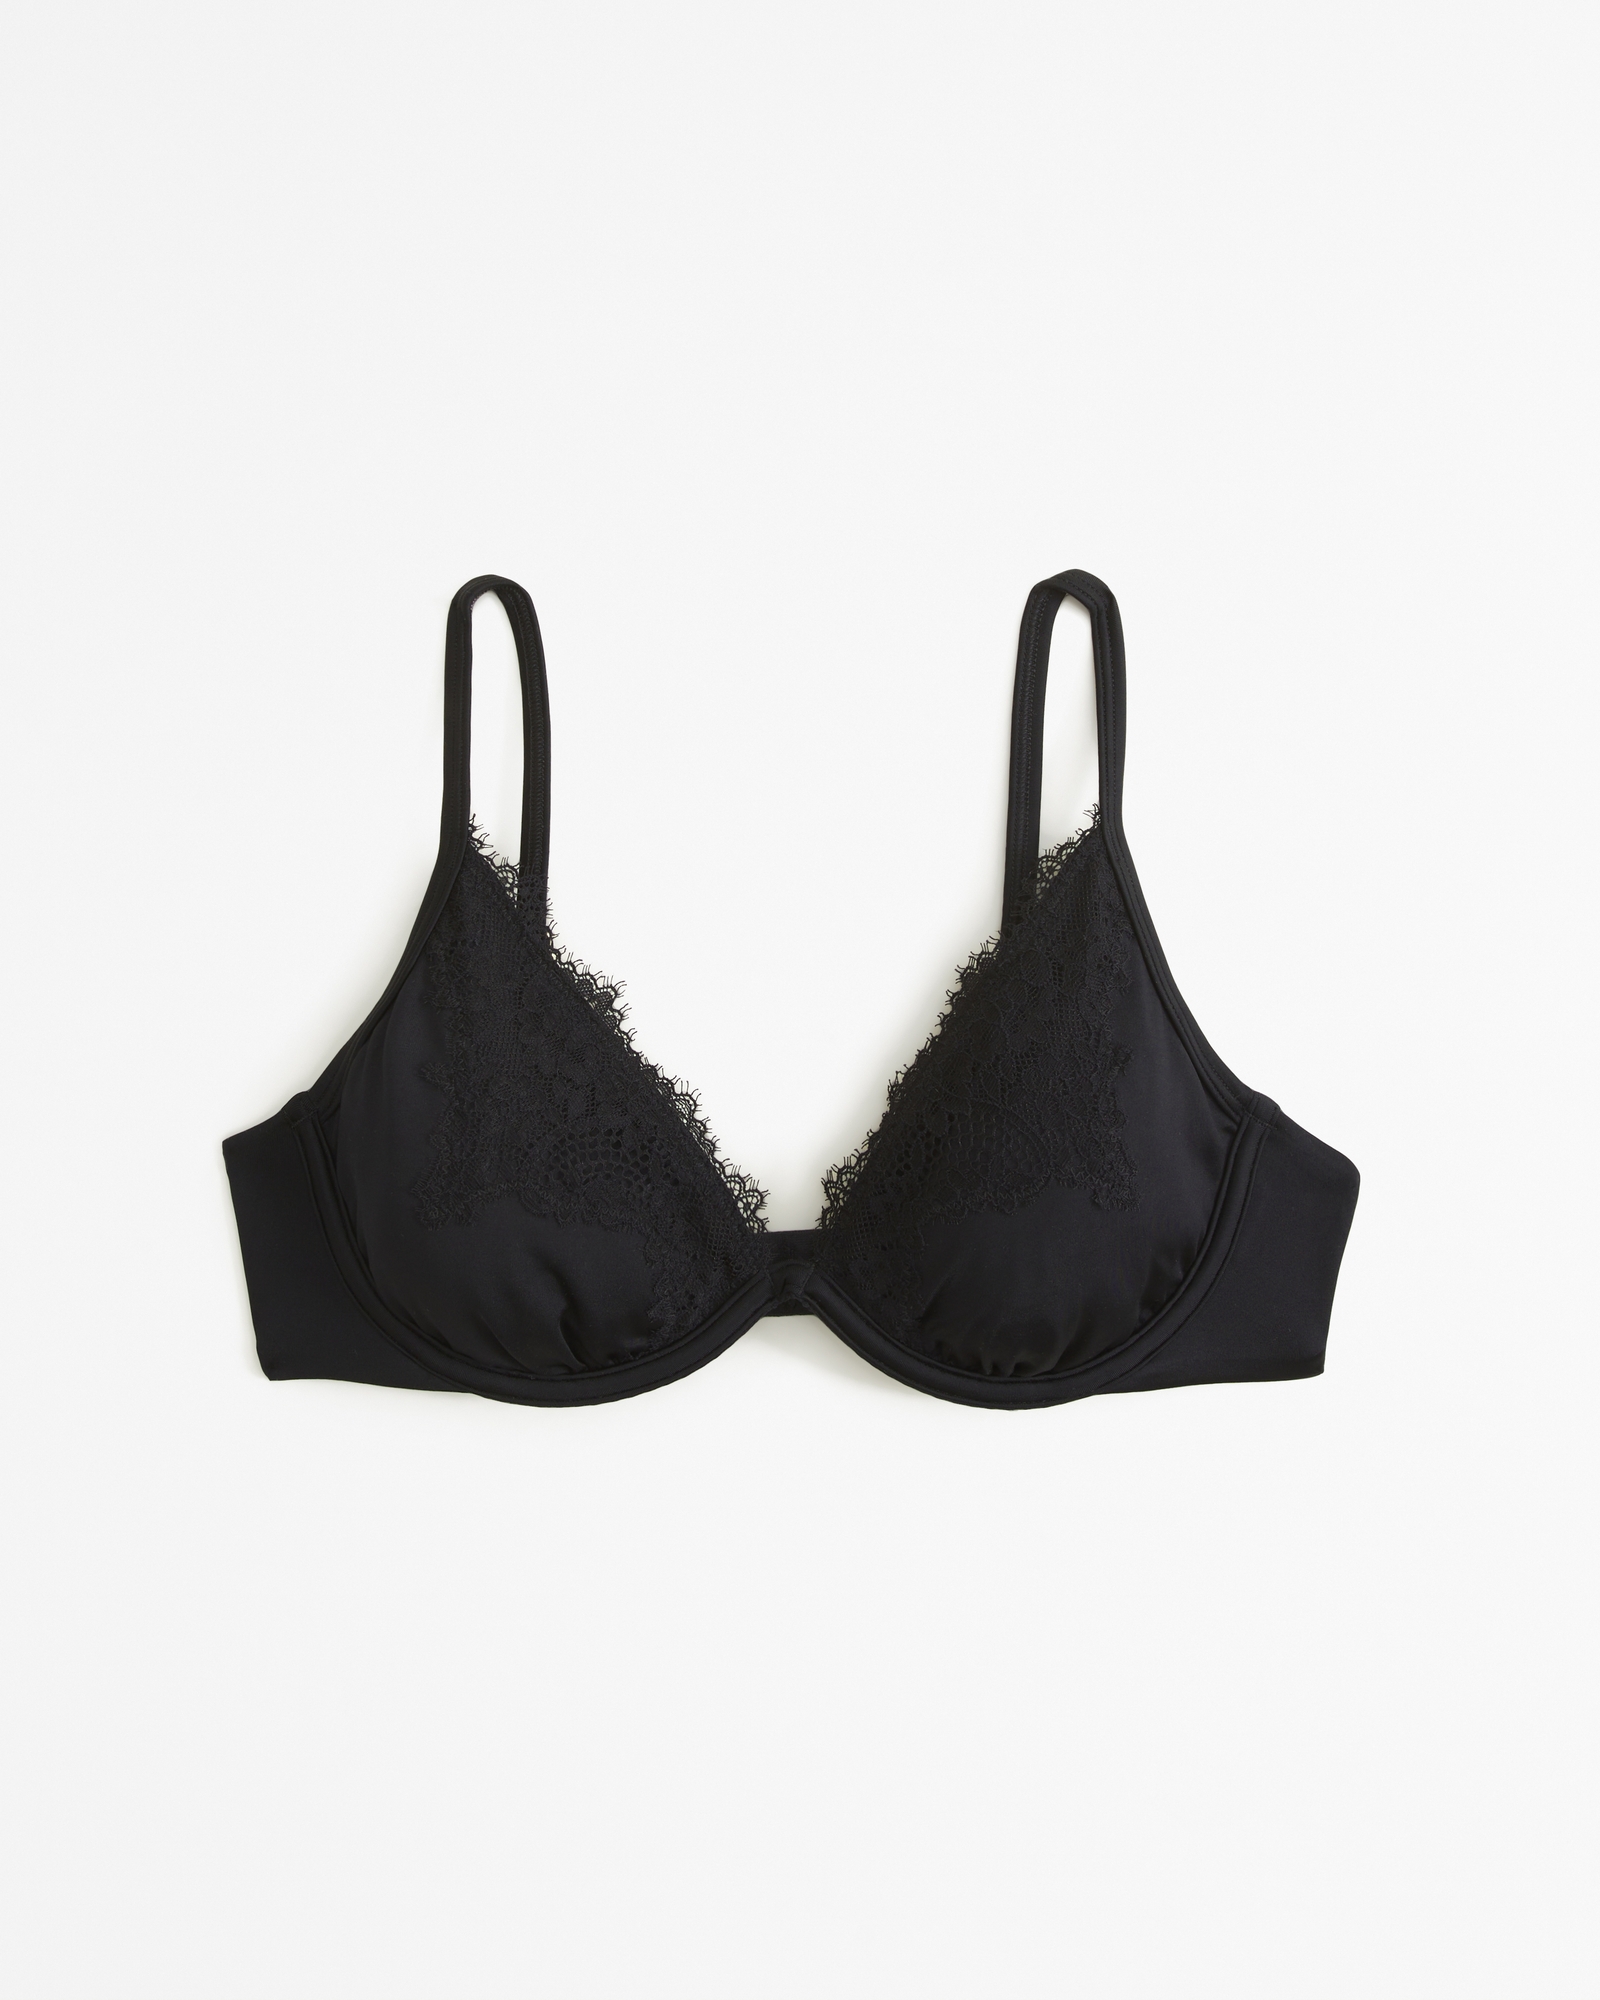 Embroidered & Satin Bralette with Underwire Support & High-Waisted